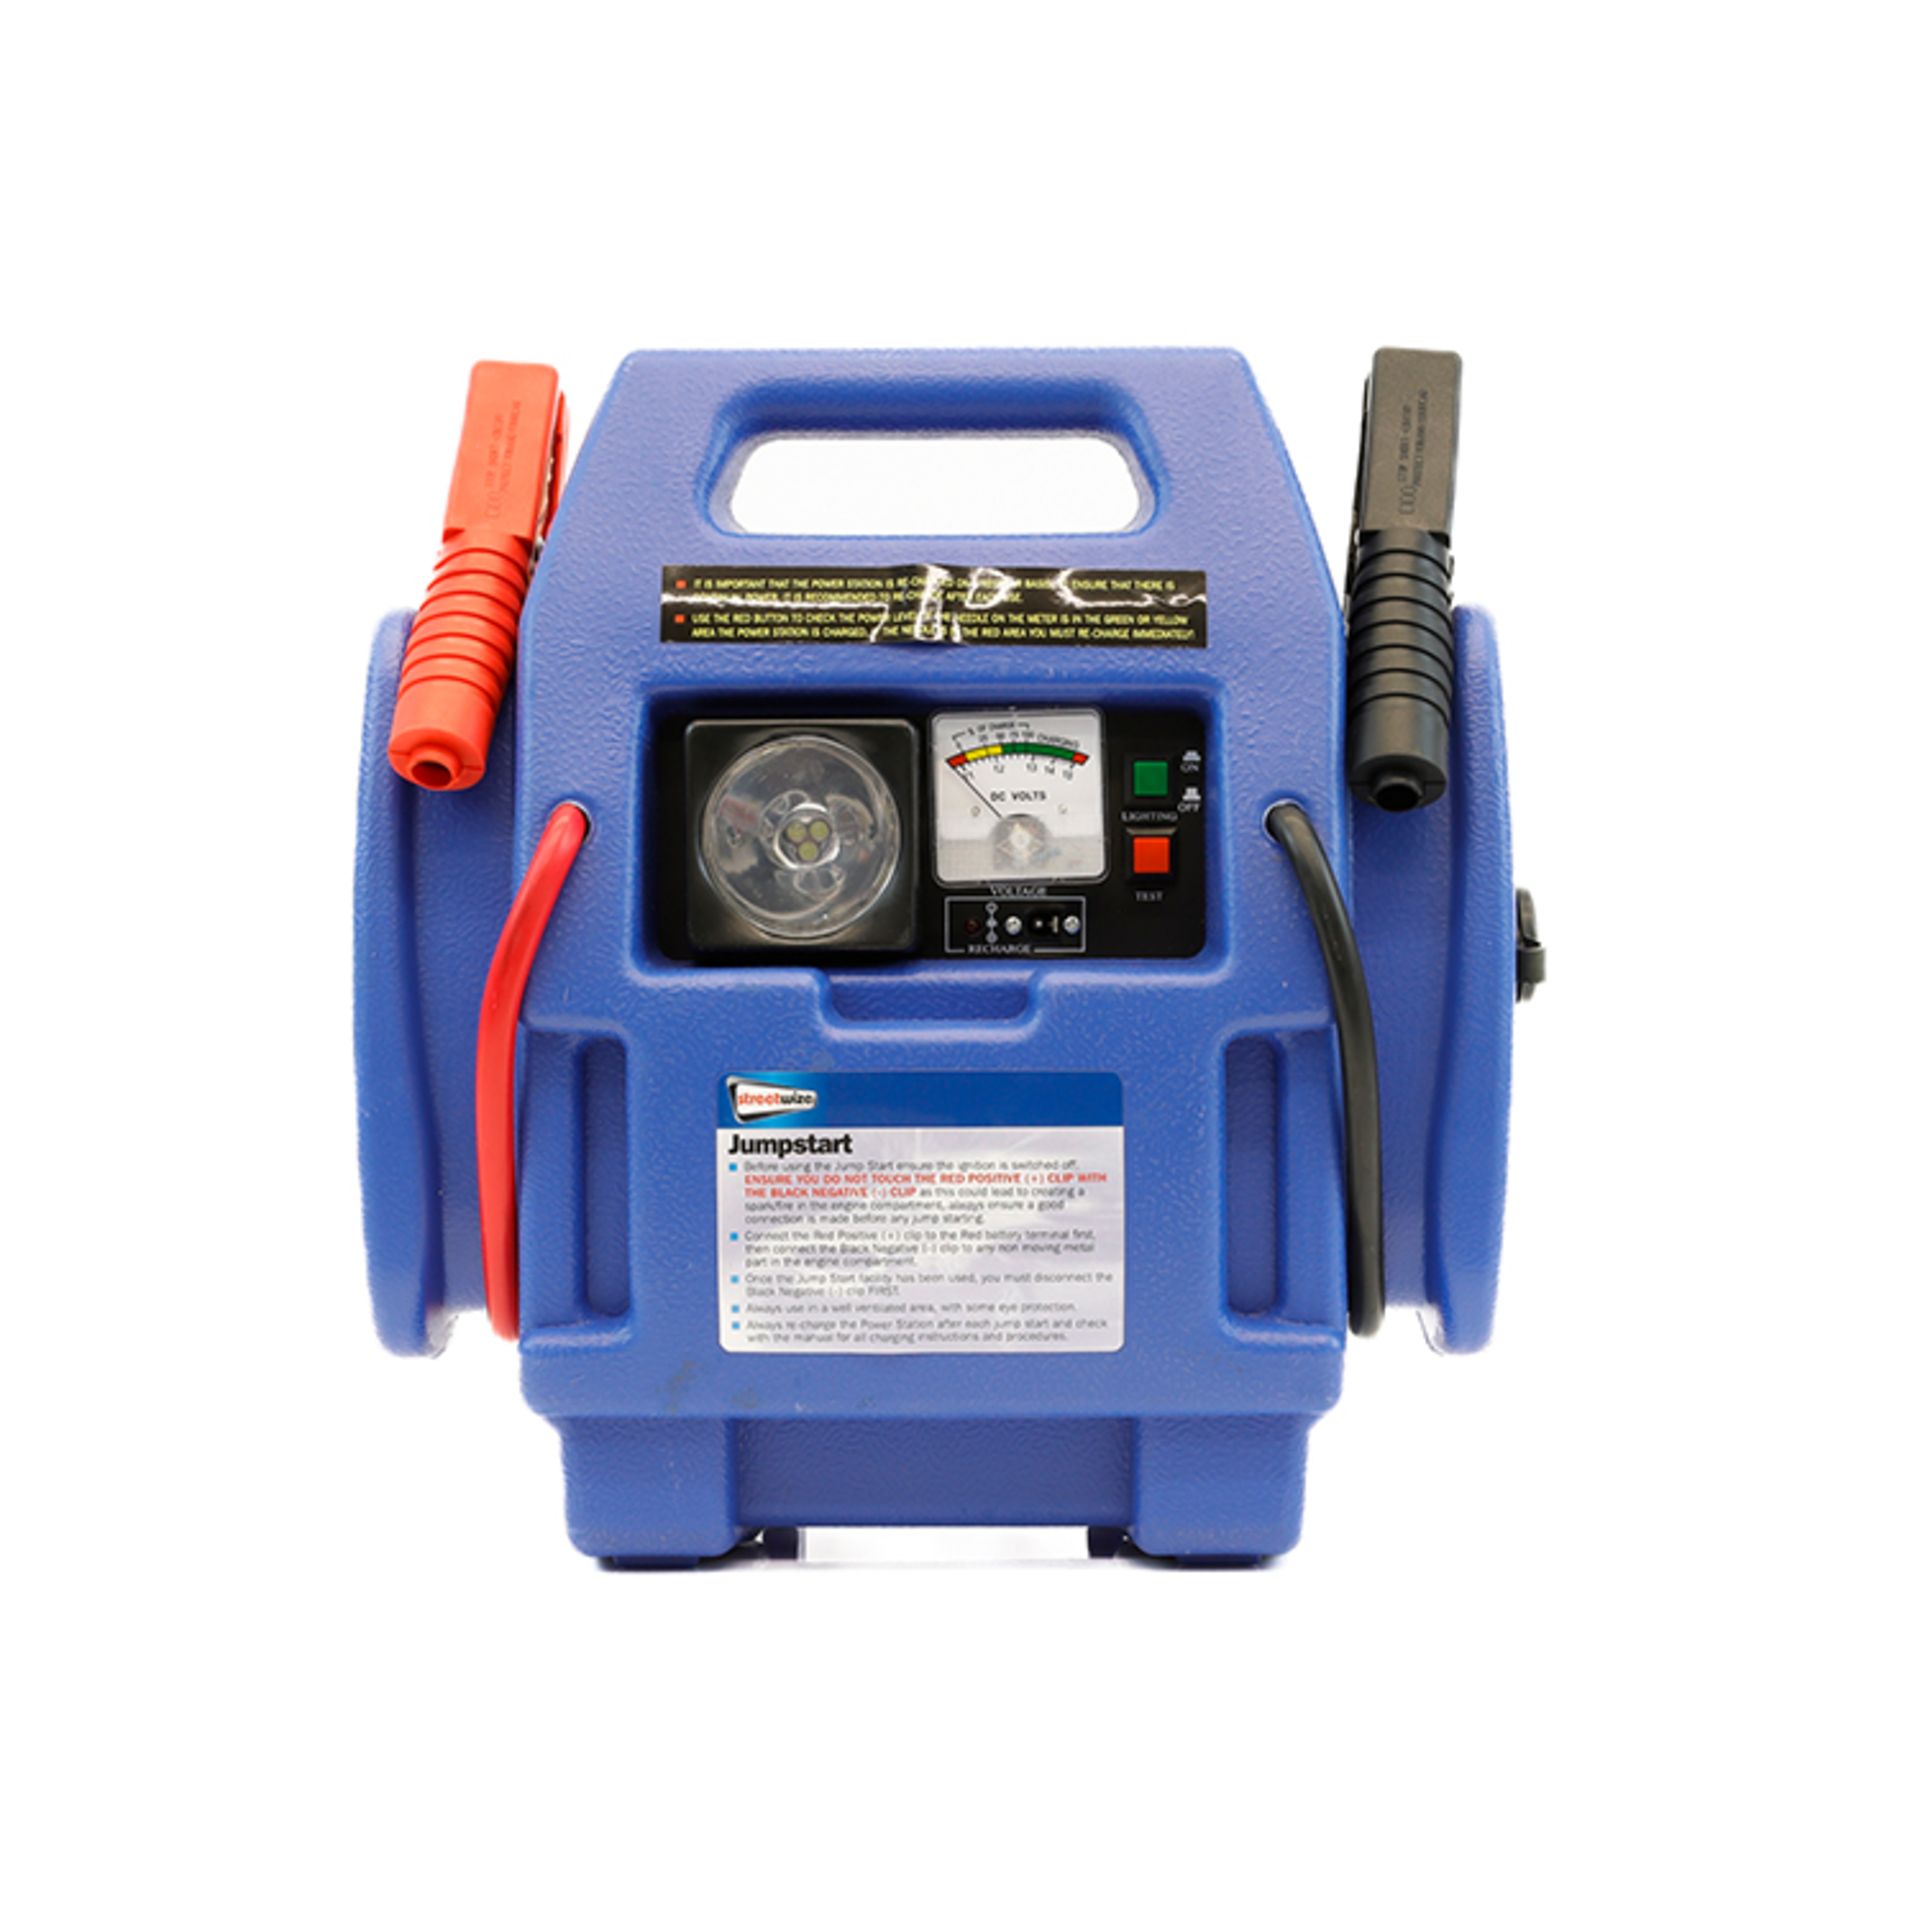 Reboxed Streetwize 10Ah 12V Portable Power Station & Emergency Jump Start With 300PSI Air Compressor